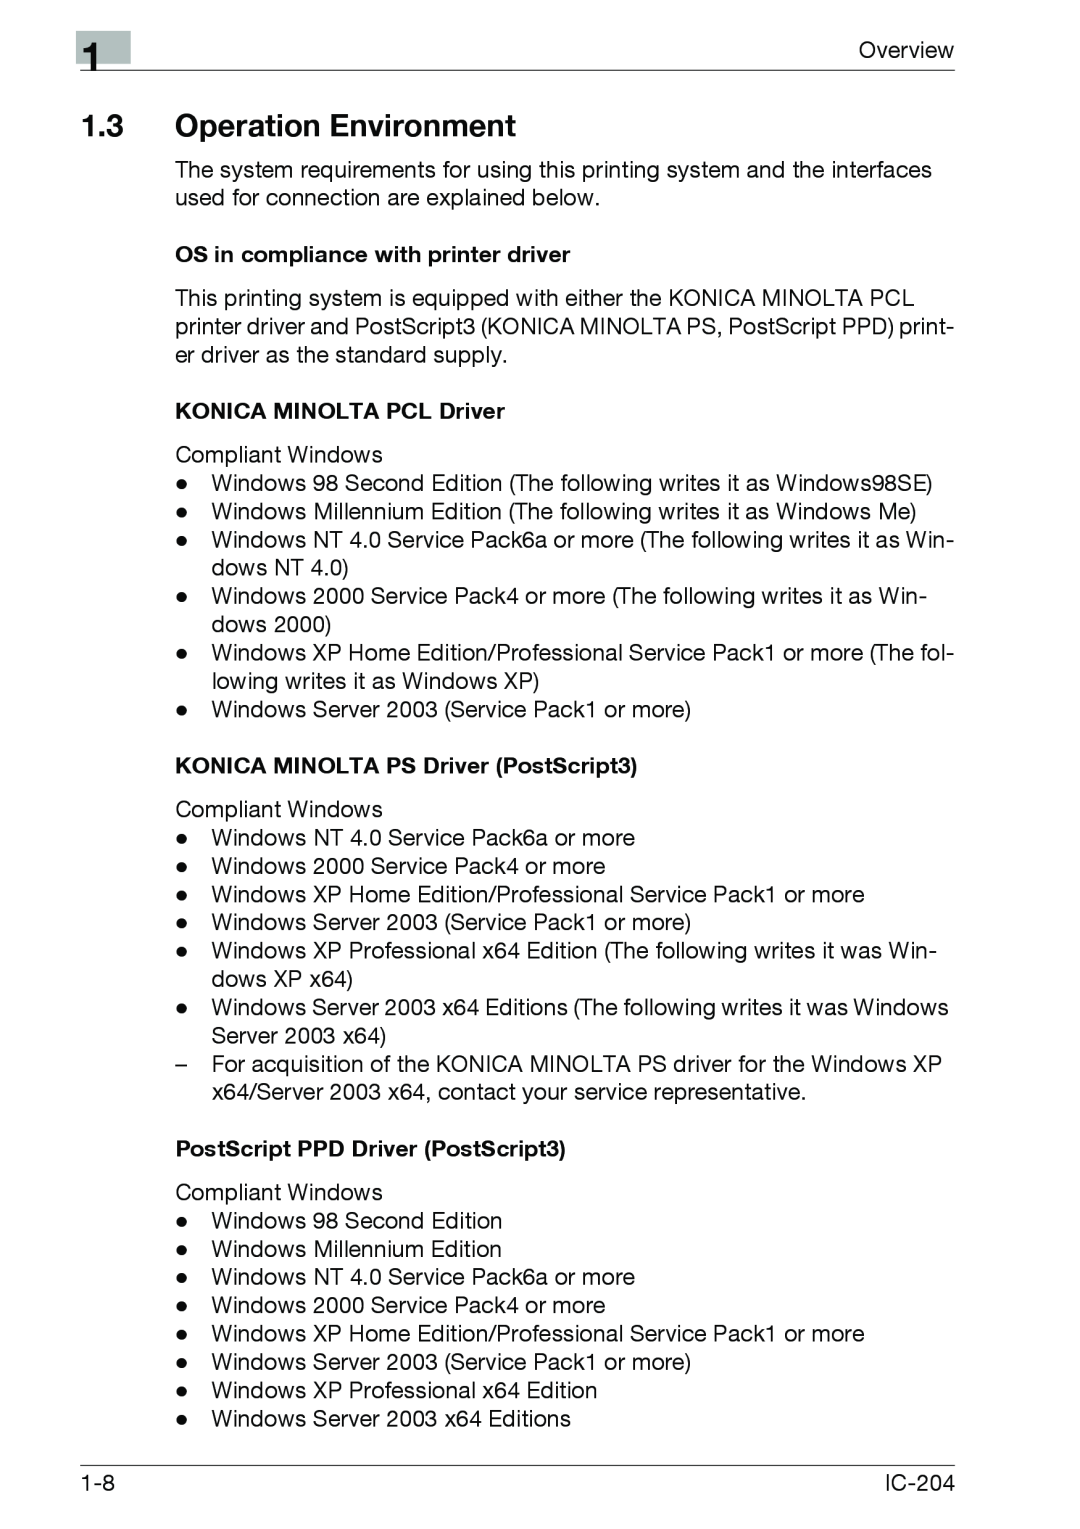 Konica Minolta IC-204 manual 1.3Operation Environment, OS in compliance with printer driver, KONICA MINOLTA PCL Driver 